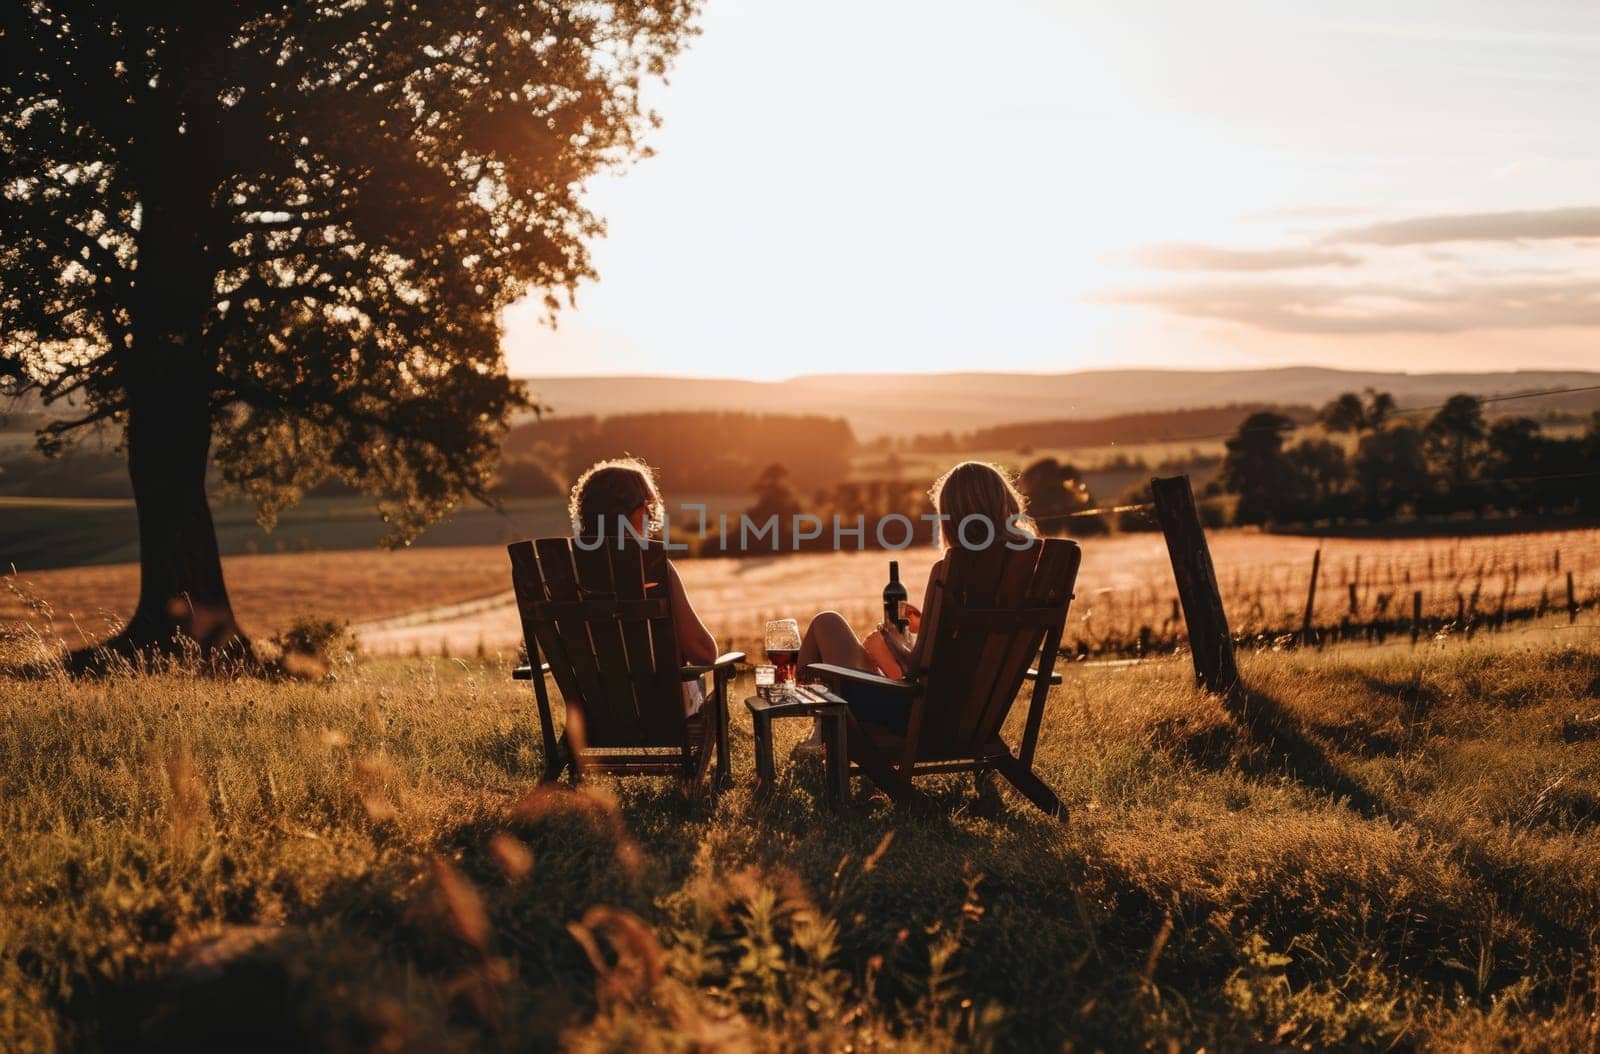 Two friends savoring a peaceful evening together in armchairs, enjoying a sunset view over the rolling countryside hills